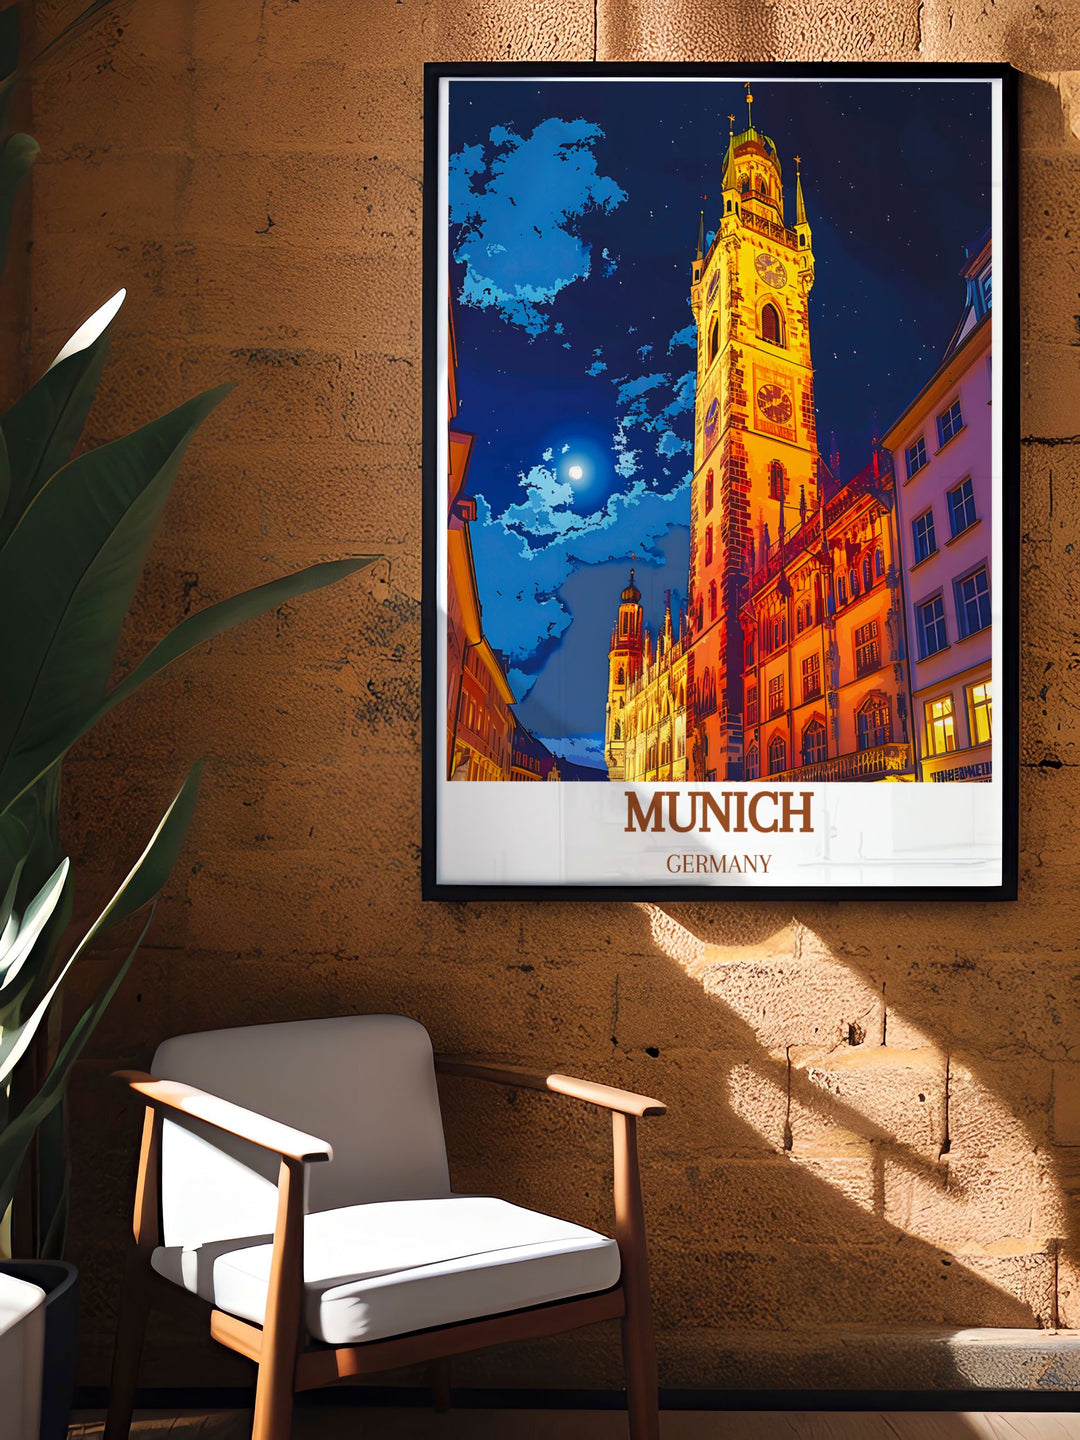 Stunning GERMANY Frauenkirche Dresden print in Munich Poster format perfect for home decor travel lovers and art enthusiasts vibrant colors and intricate details make it a standout piece ideal for gifting on birthdays anniversaries or as Christmas gifts